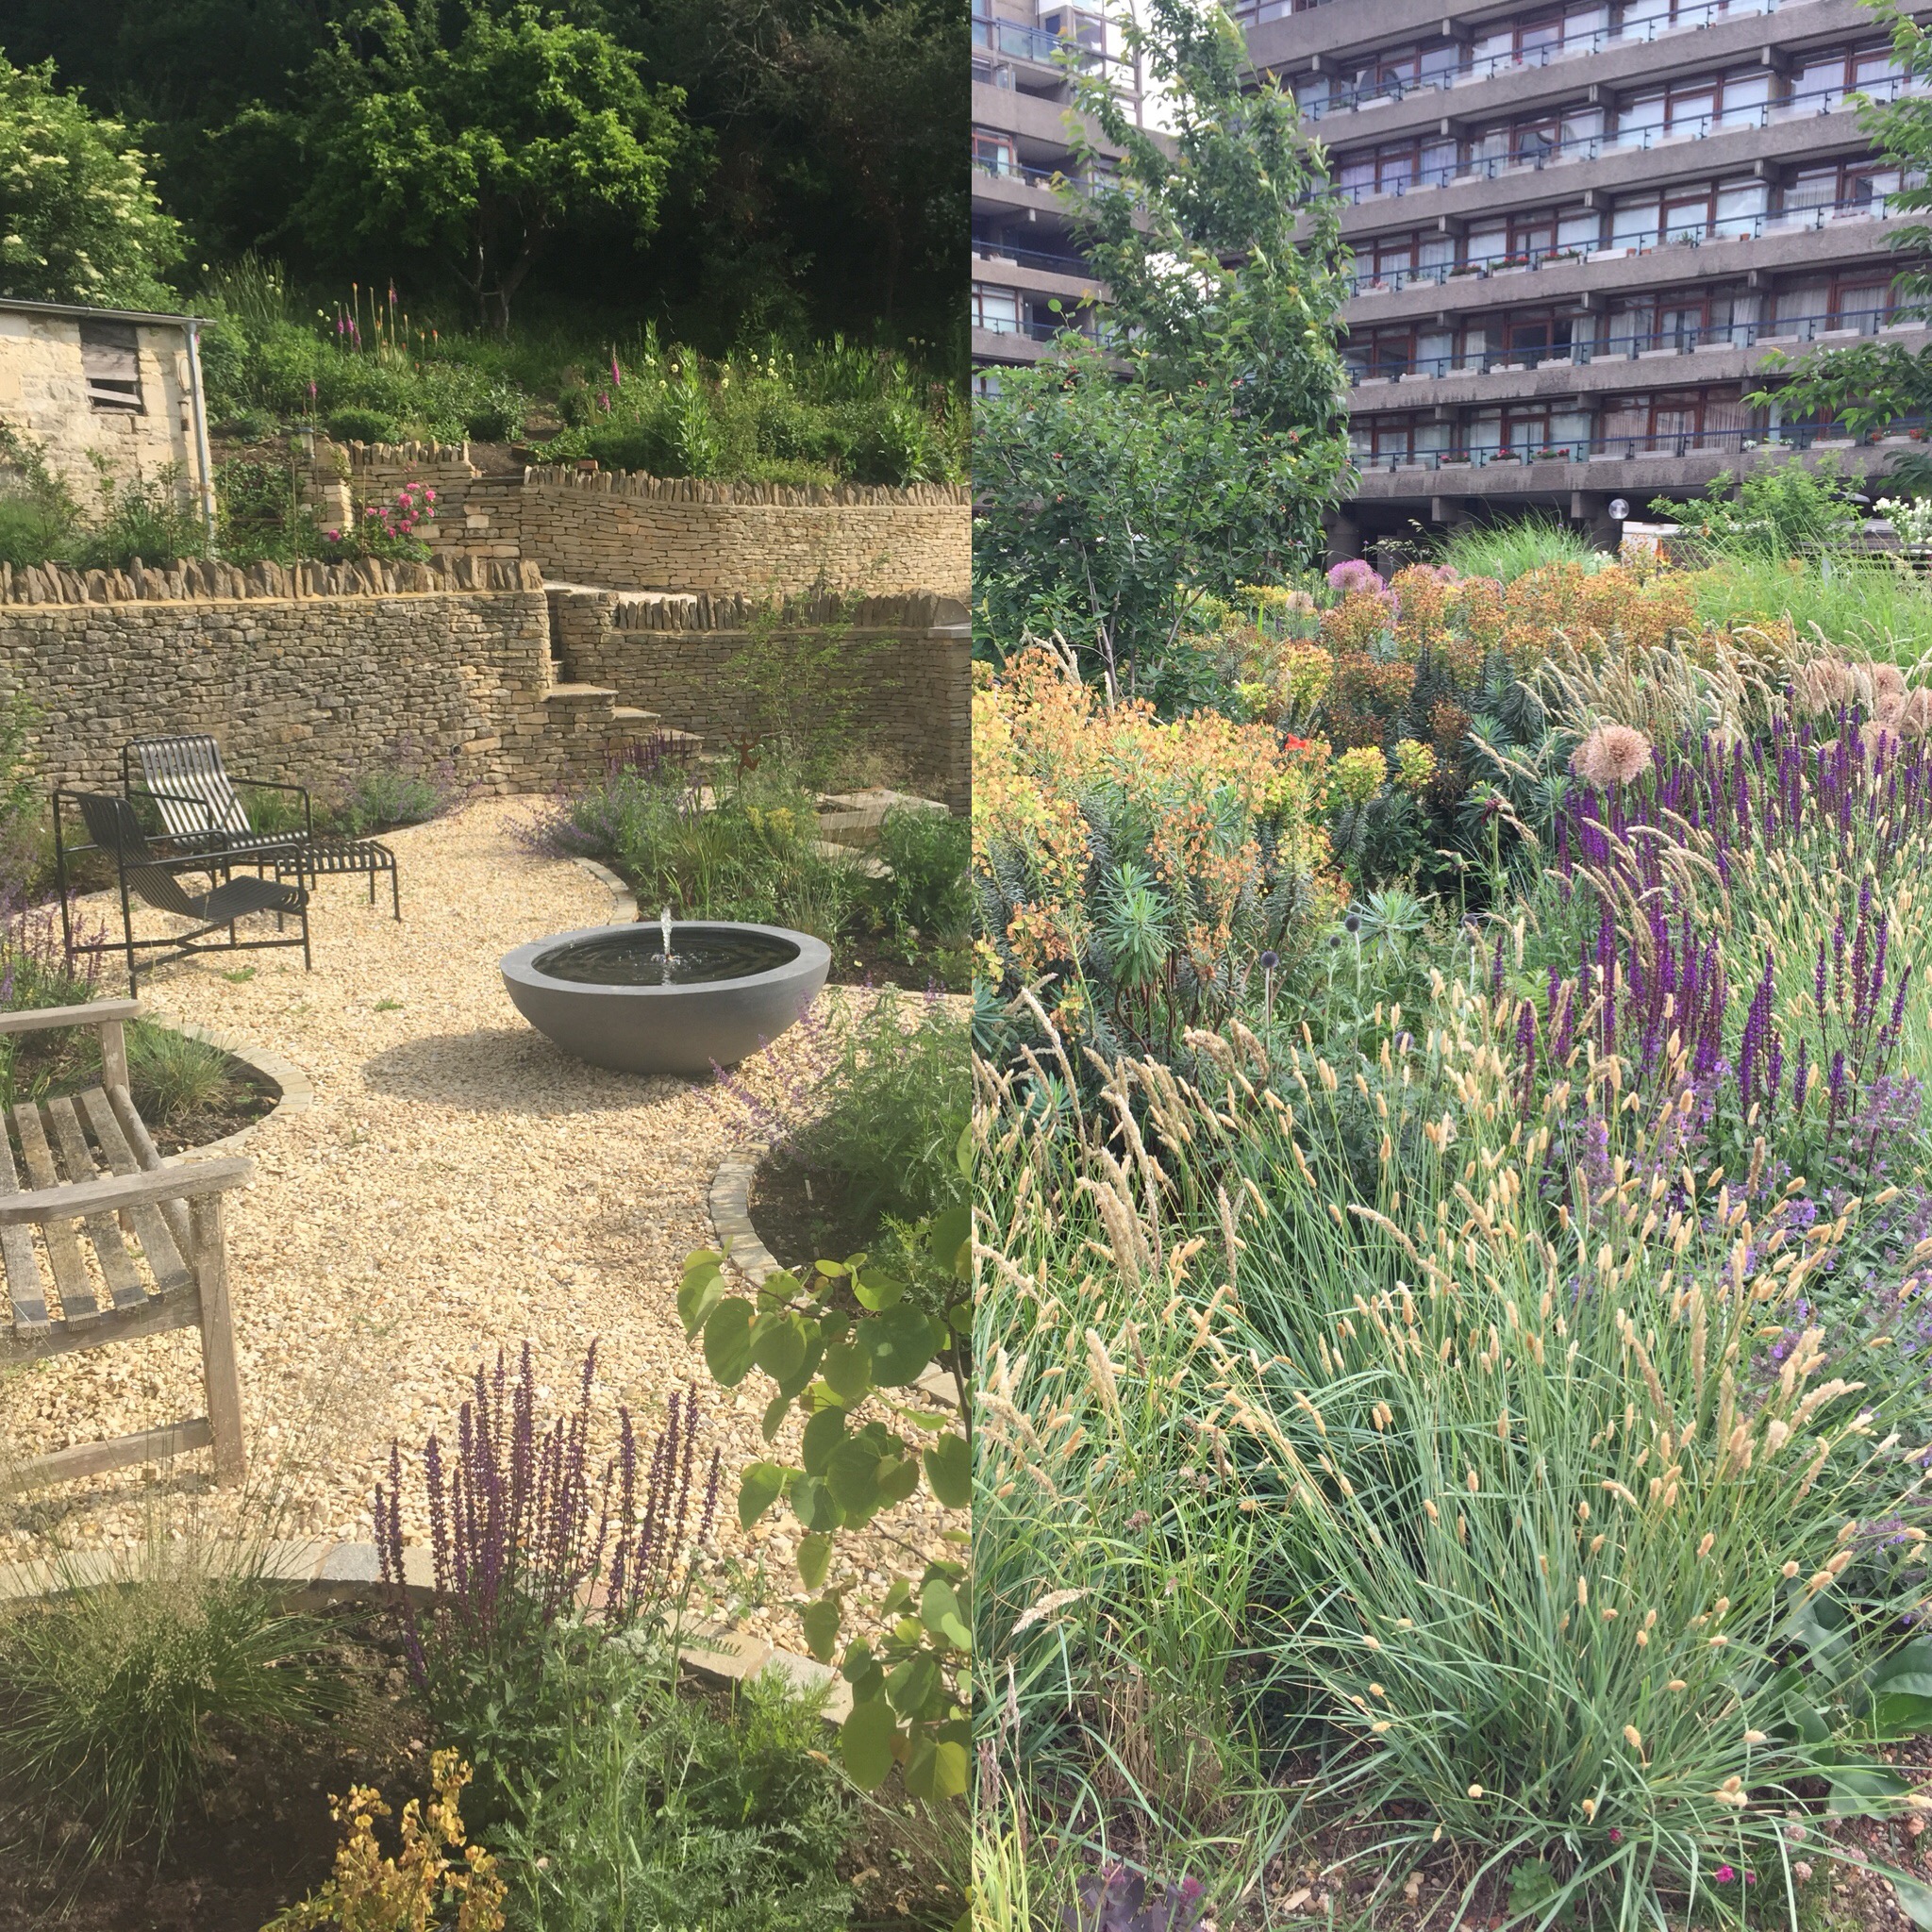 Our New Garden and The Barbican Gardens